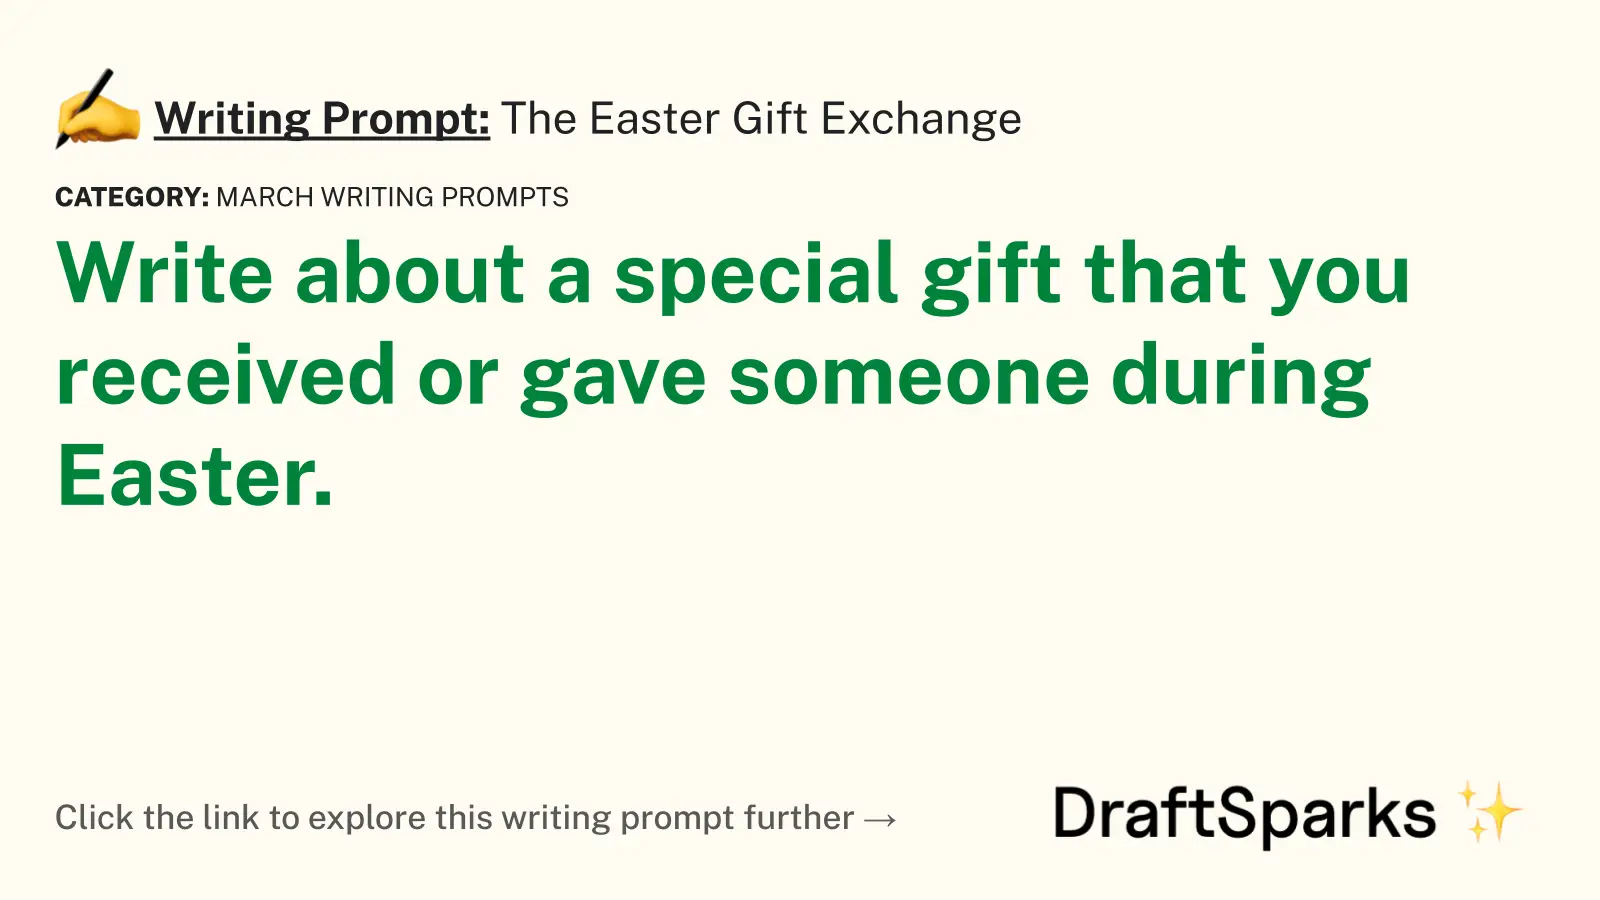 The Easter Gift Exchange